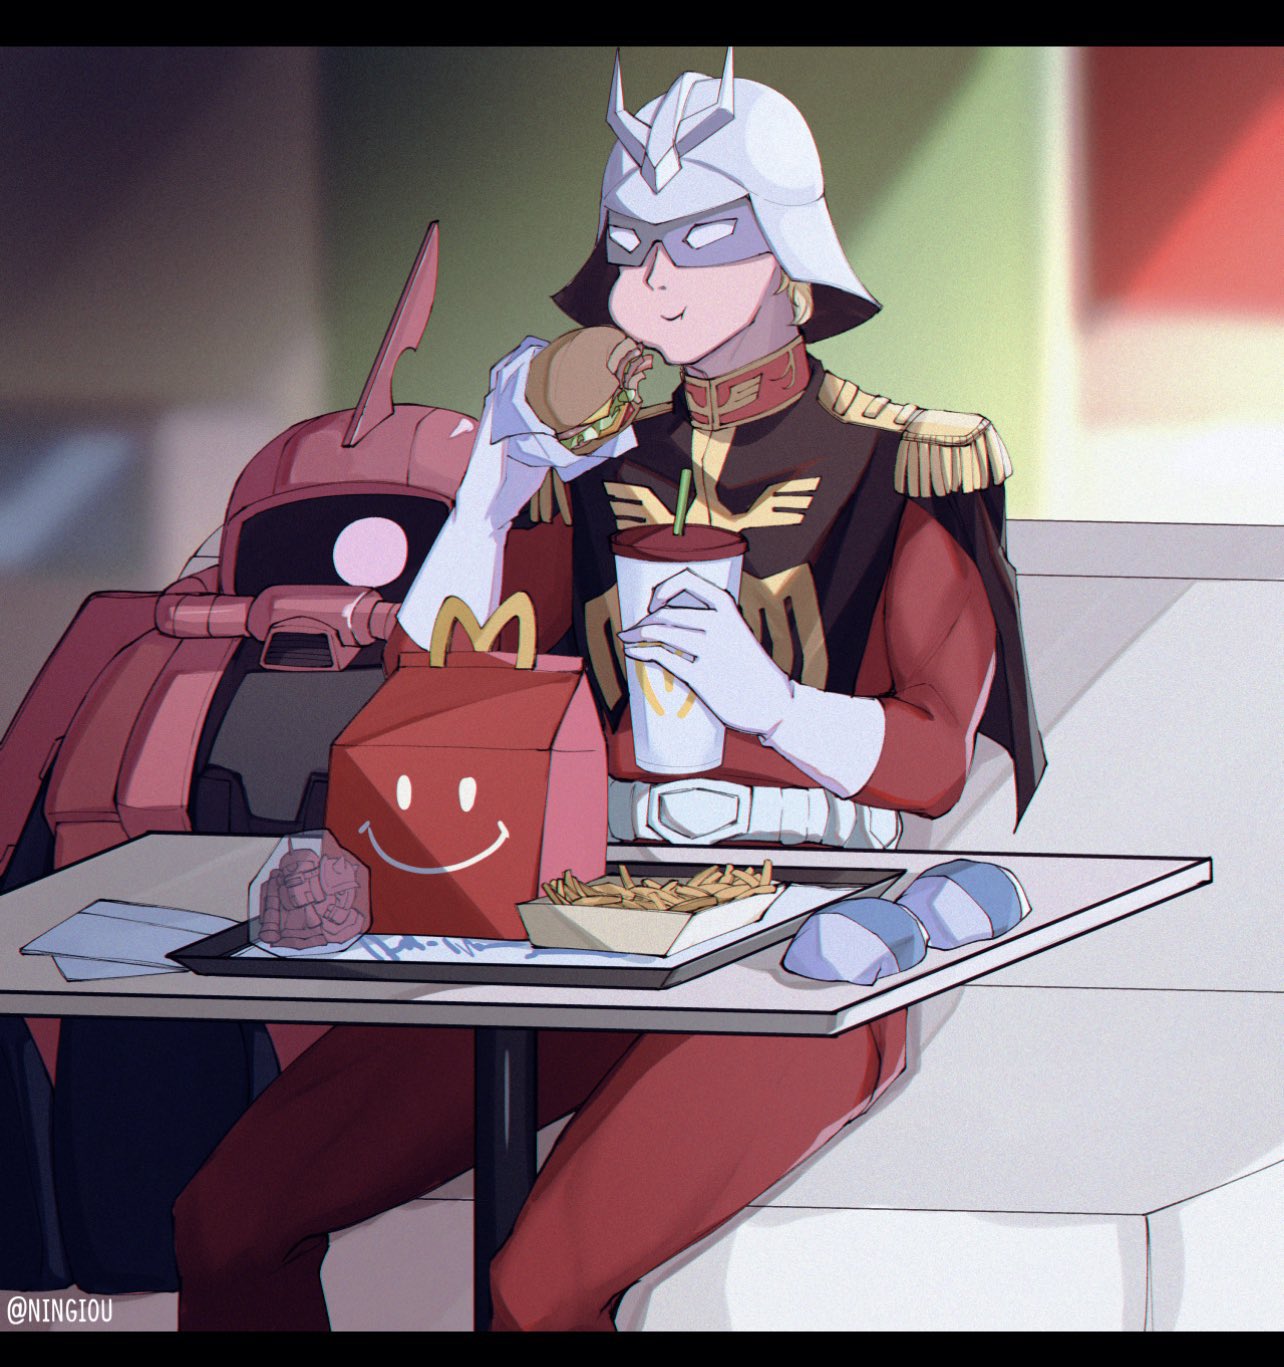 1boy blonde_hair burger char_aznable cup disposable_cup eating english_commentary food french_fries gloves gundam helmet highres holding holding_cup holding_food jacket kyou_(ningiou) male_focus mask mcdonald's mecha mobile_suit mobile_suit_gundam one-eyed pink_eyes red_jacket sitting smile white_gloves zaku_ii_s_char_custom zeon